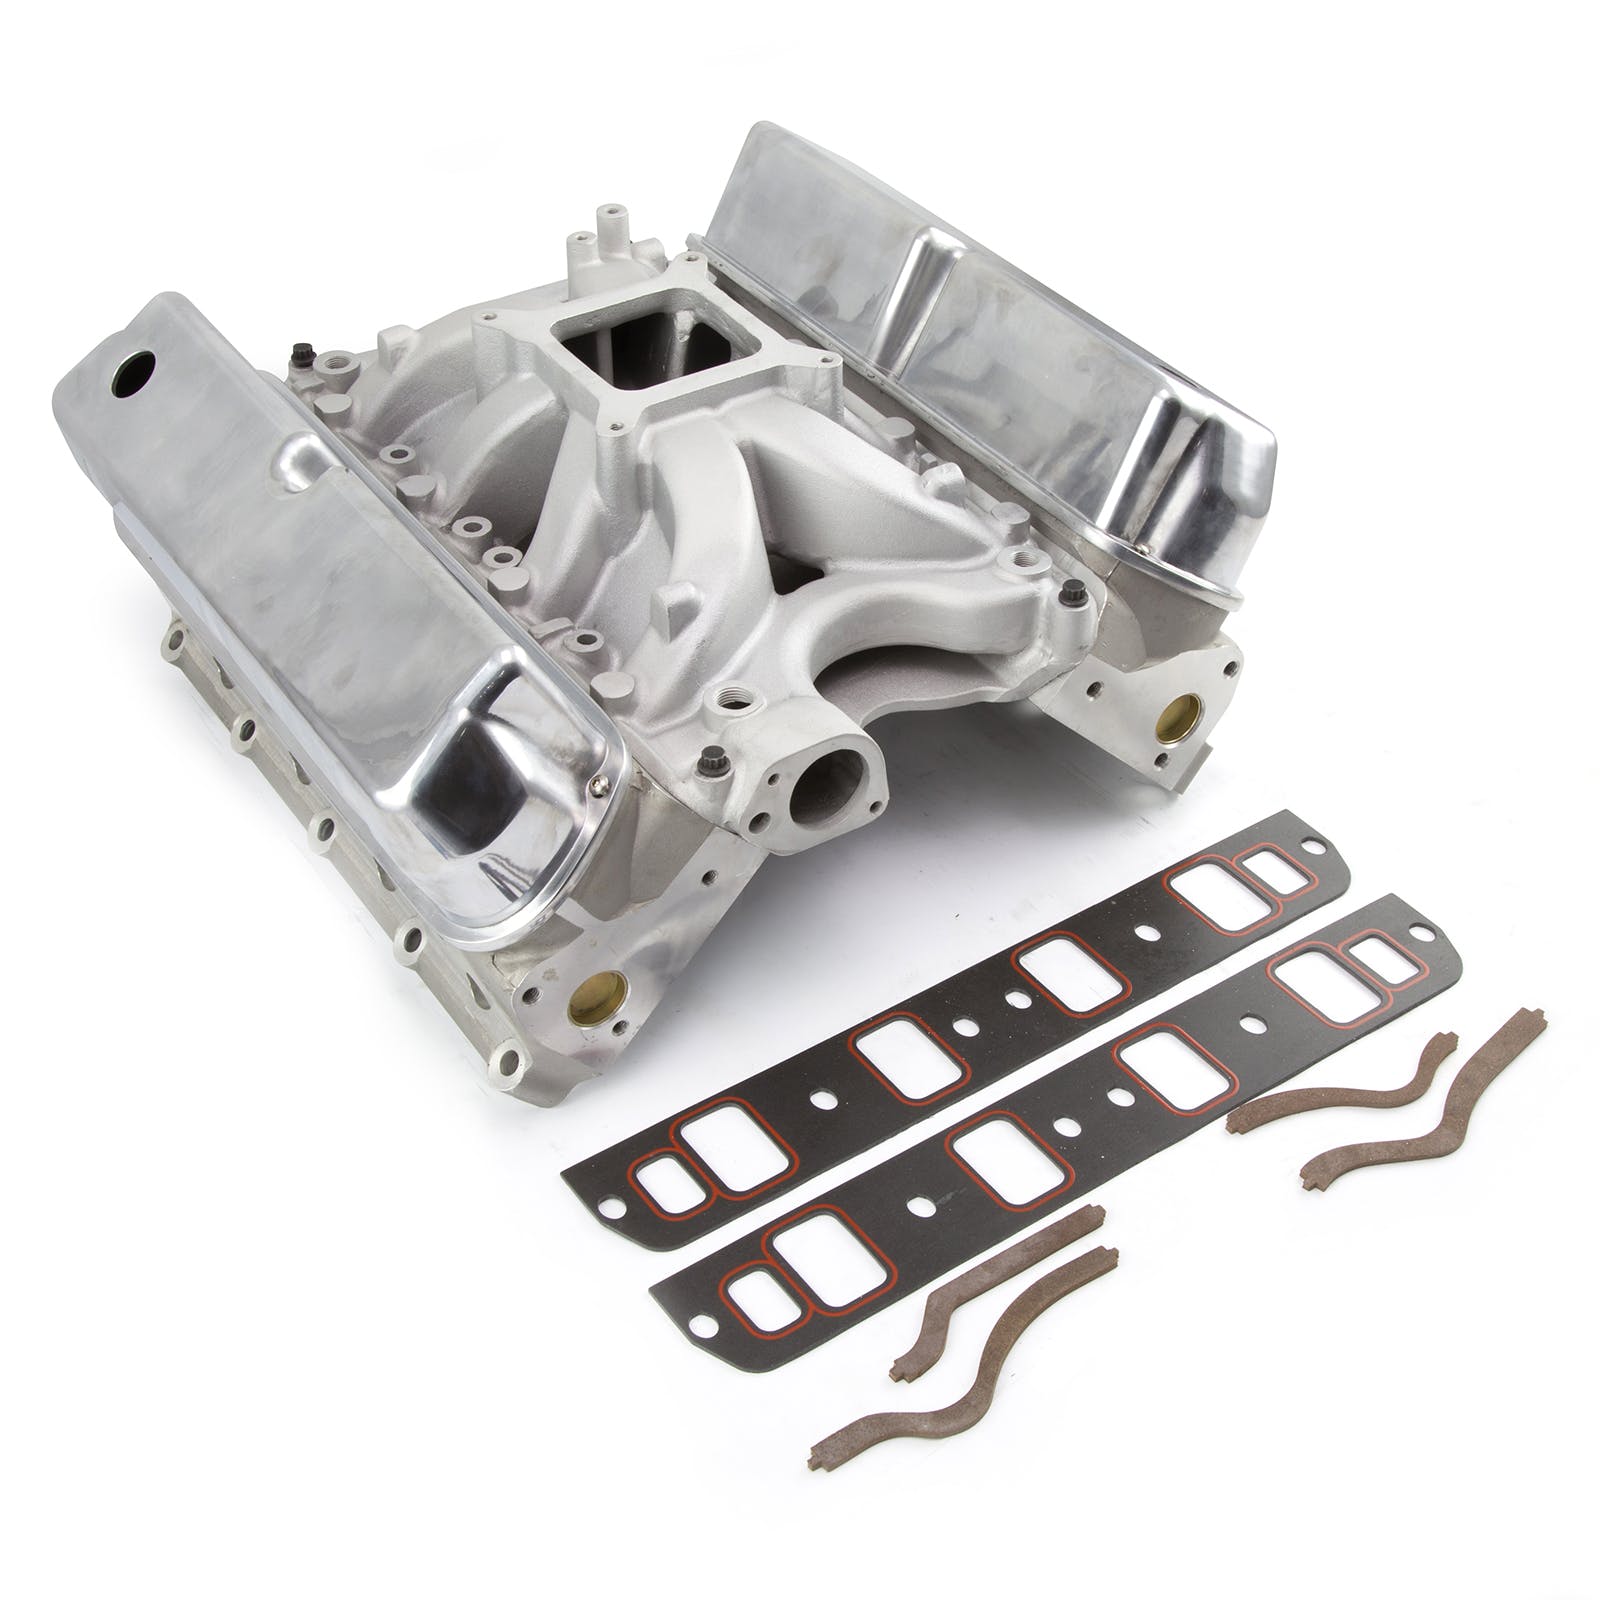 Speedmaster PCE435.1037 Solid FT CNC Cylinder Head Top End Engine Combo Kit